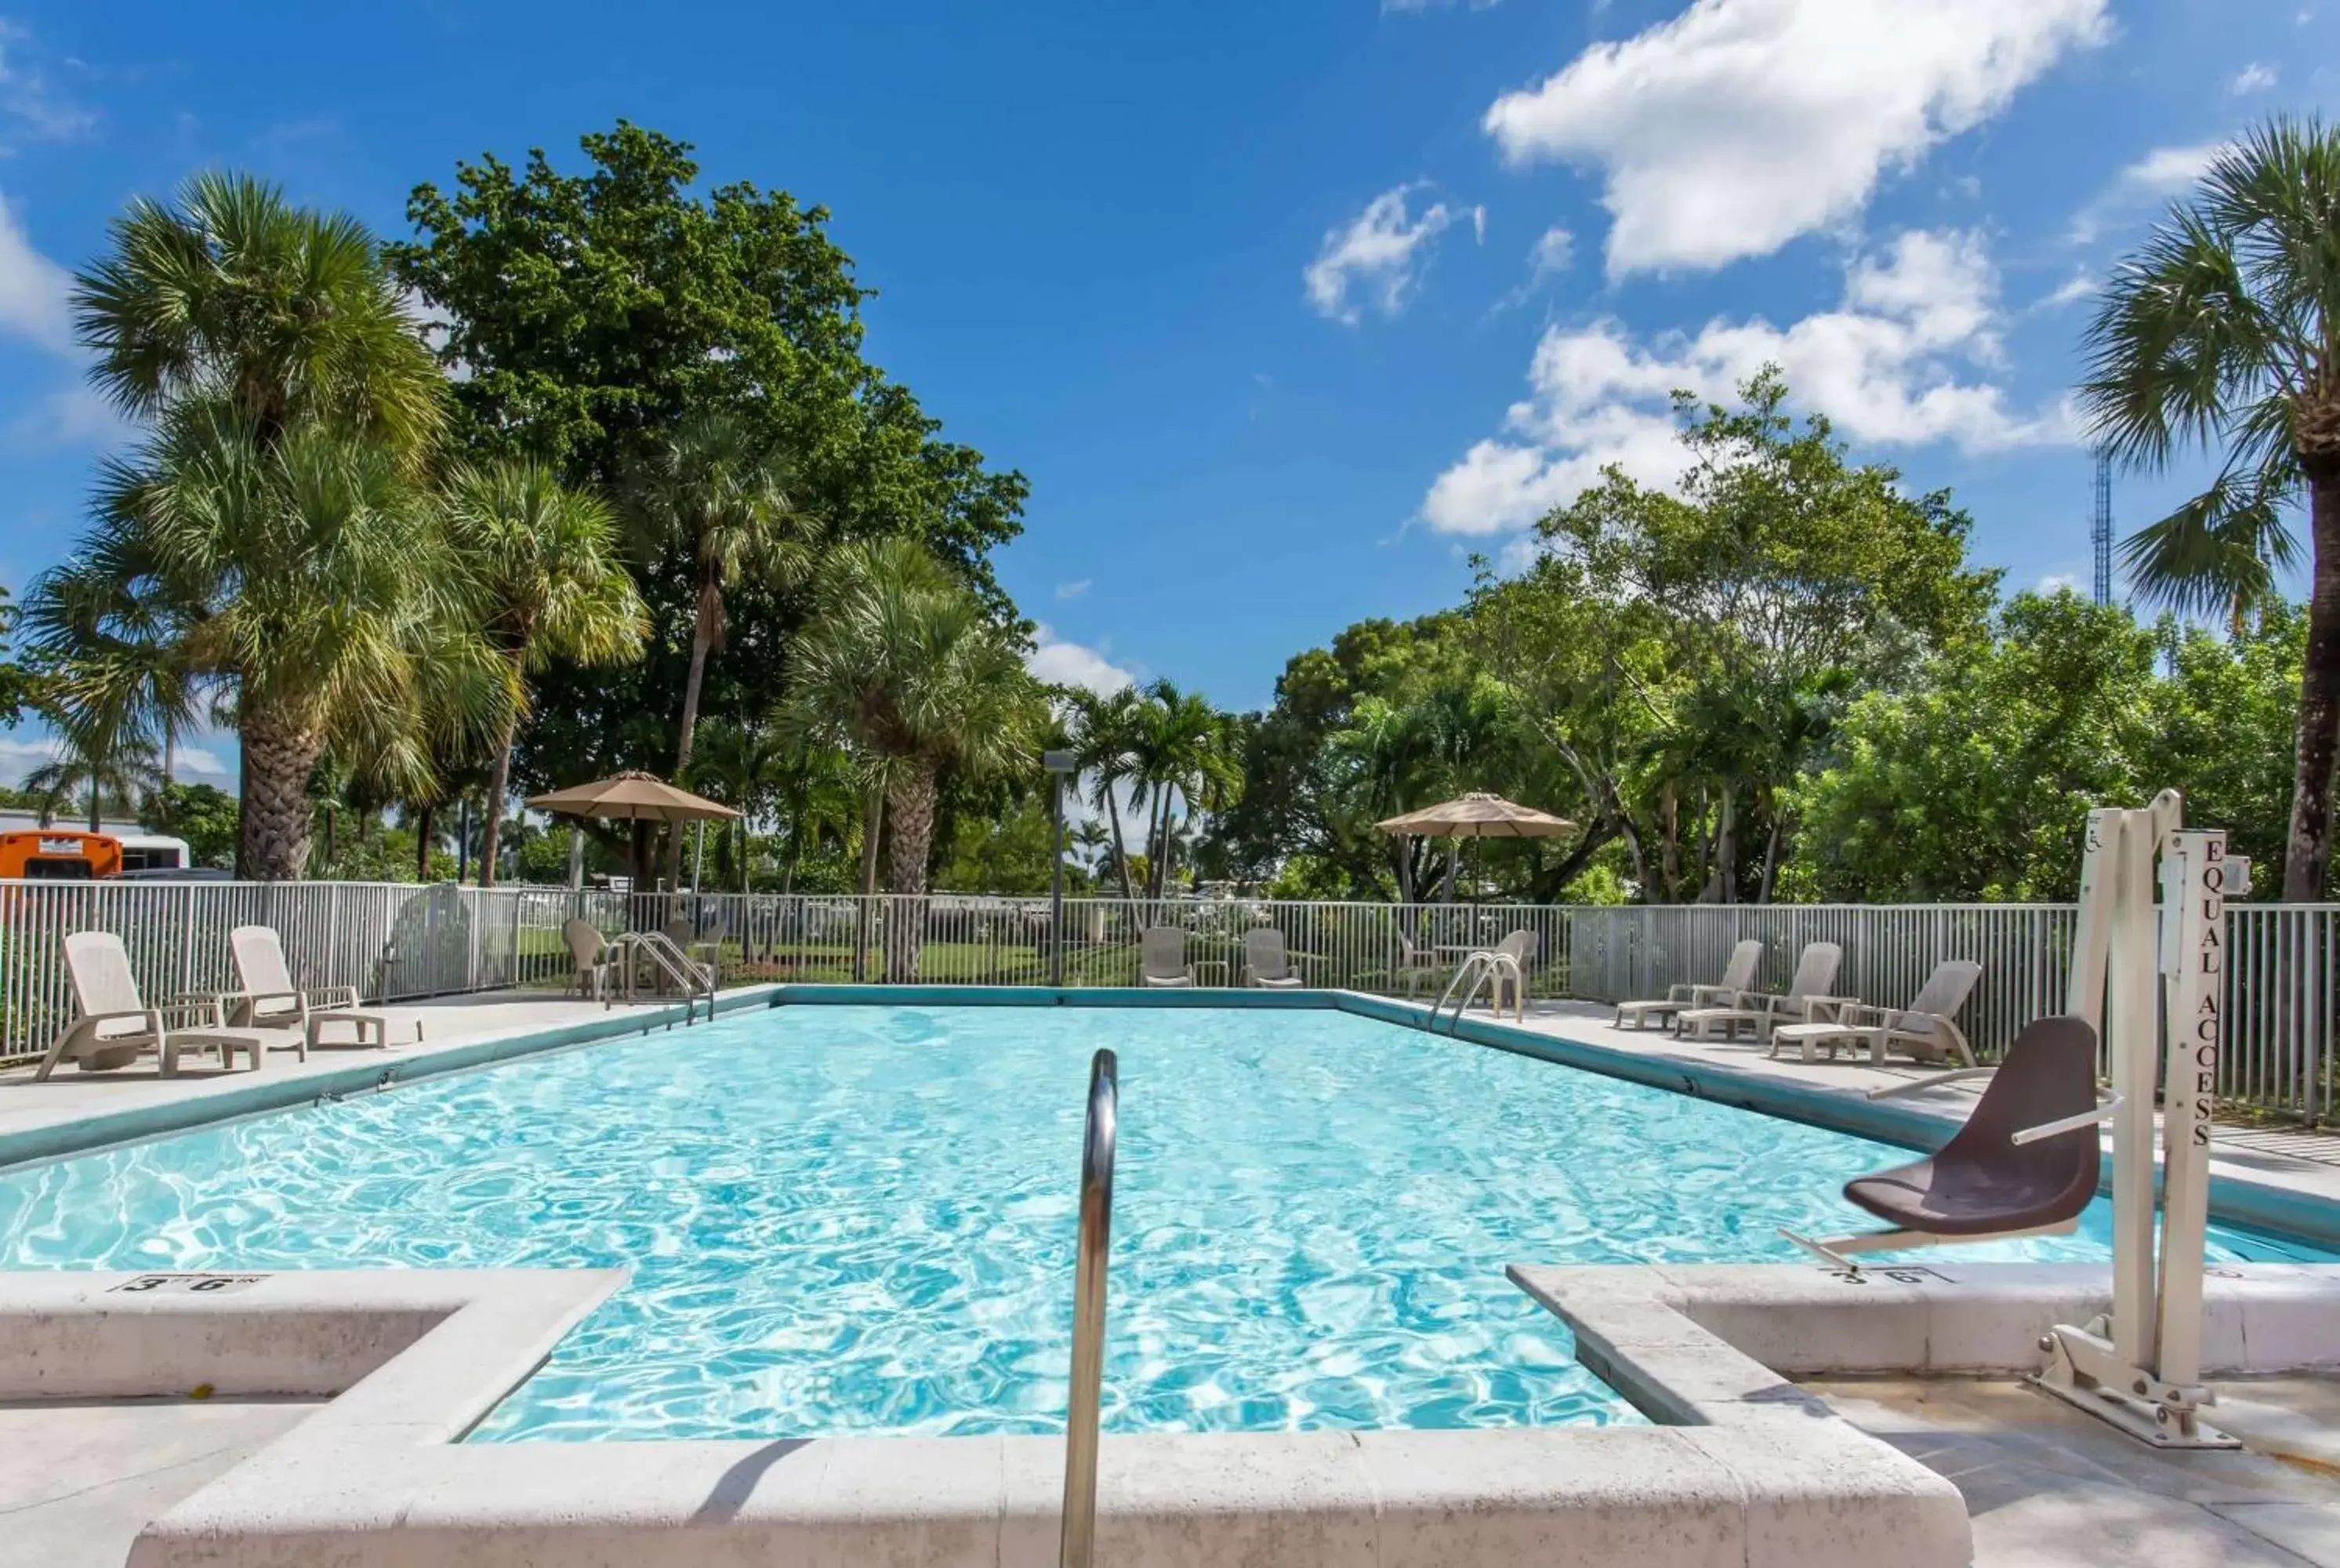 On site, Swimming Pool in Days Inn by Wyndham Fort Lauderdale Airport Cruise Port